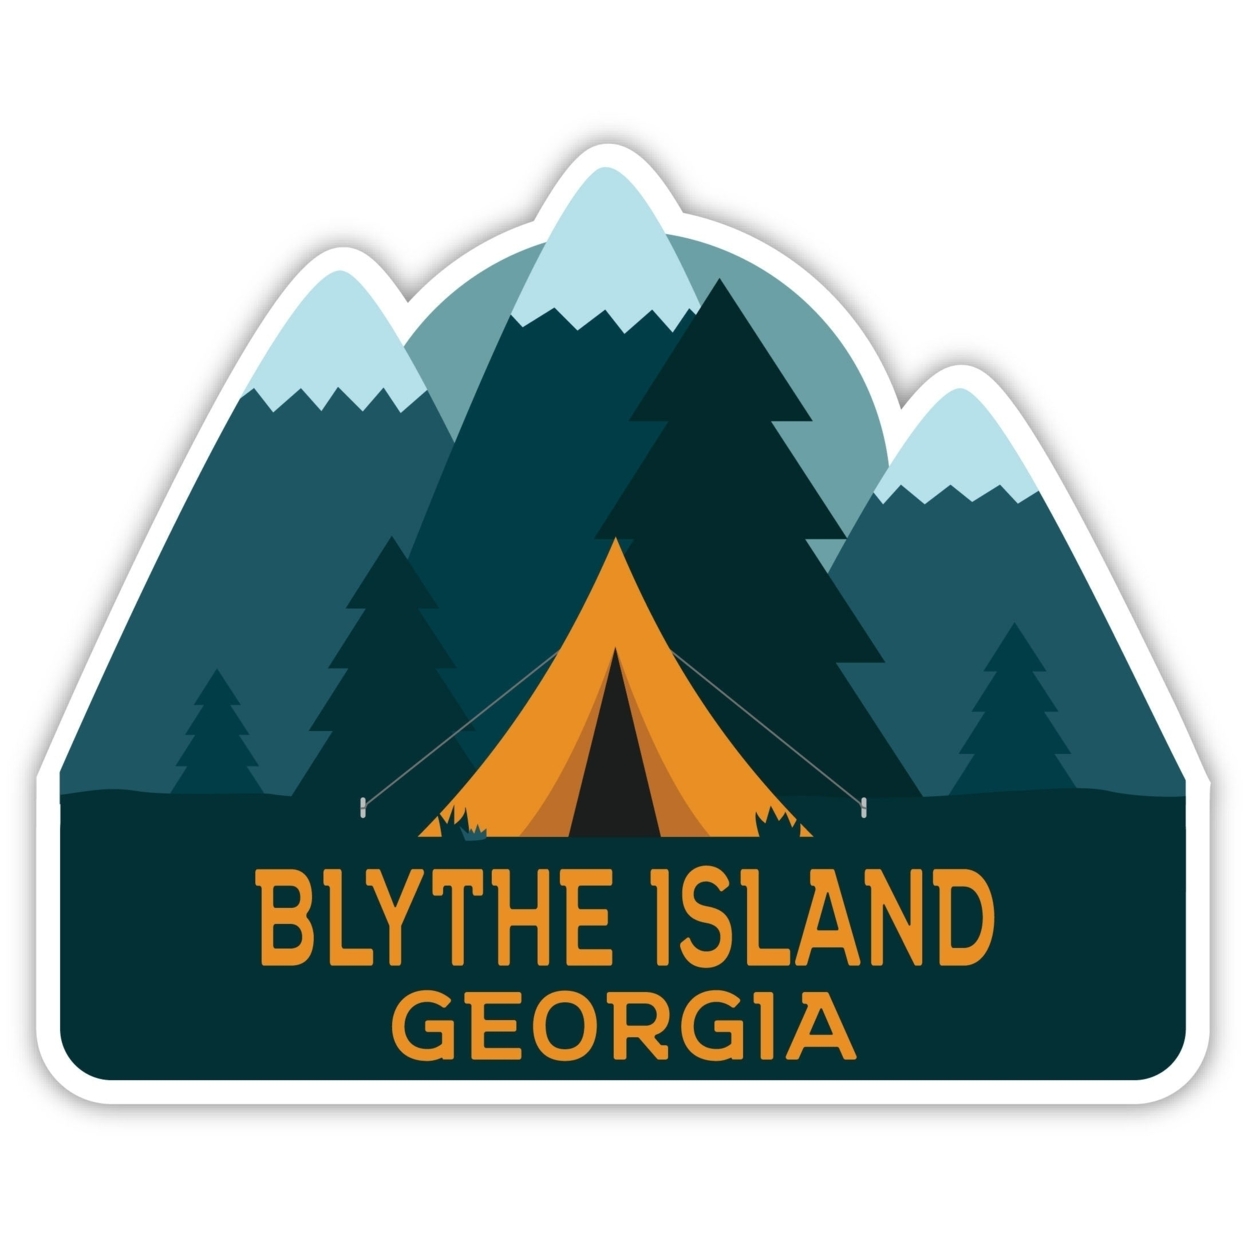 Blythe Island Georgia Souvenir Decorative Stickers (Choose Theme And Size) - 4-Pack, 8-Inch, Great Outdoors